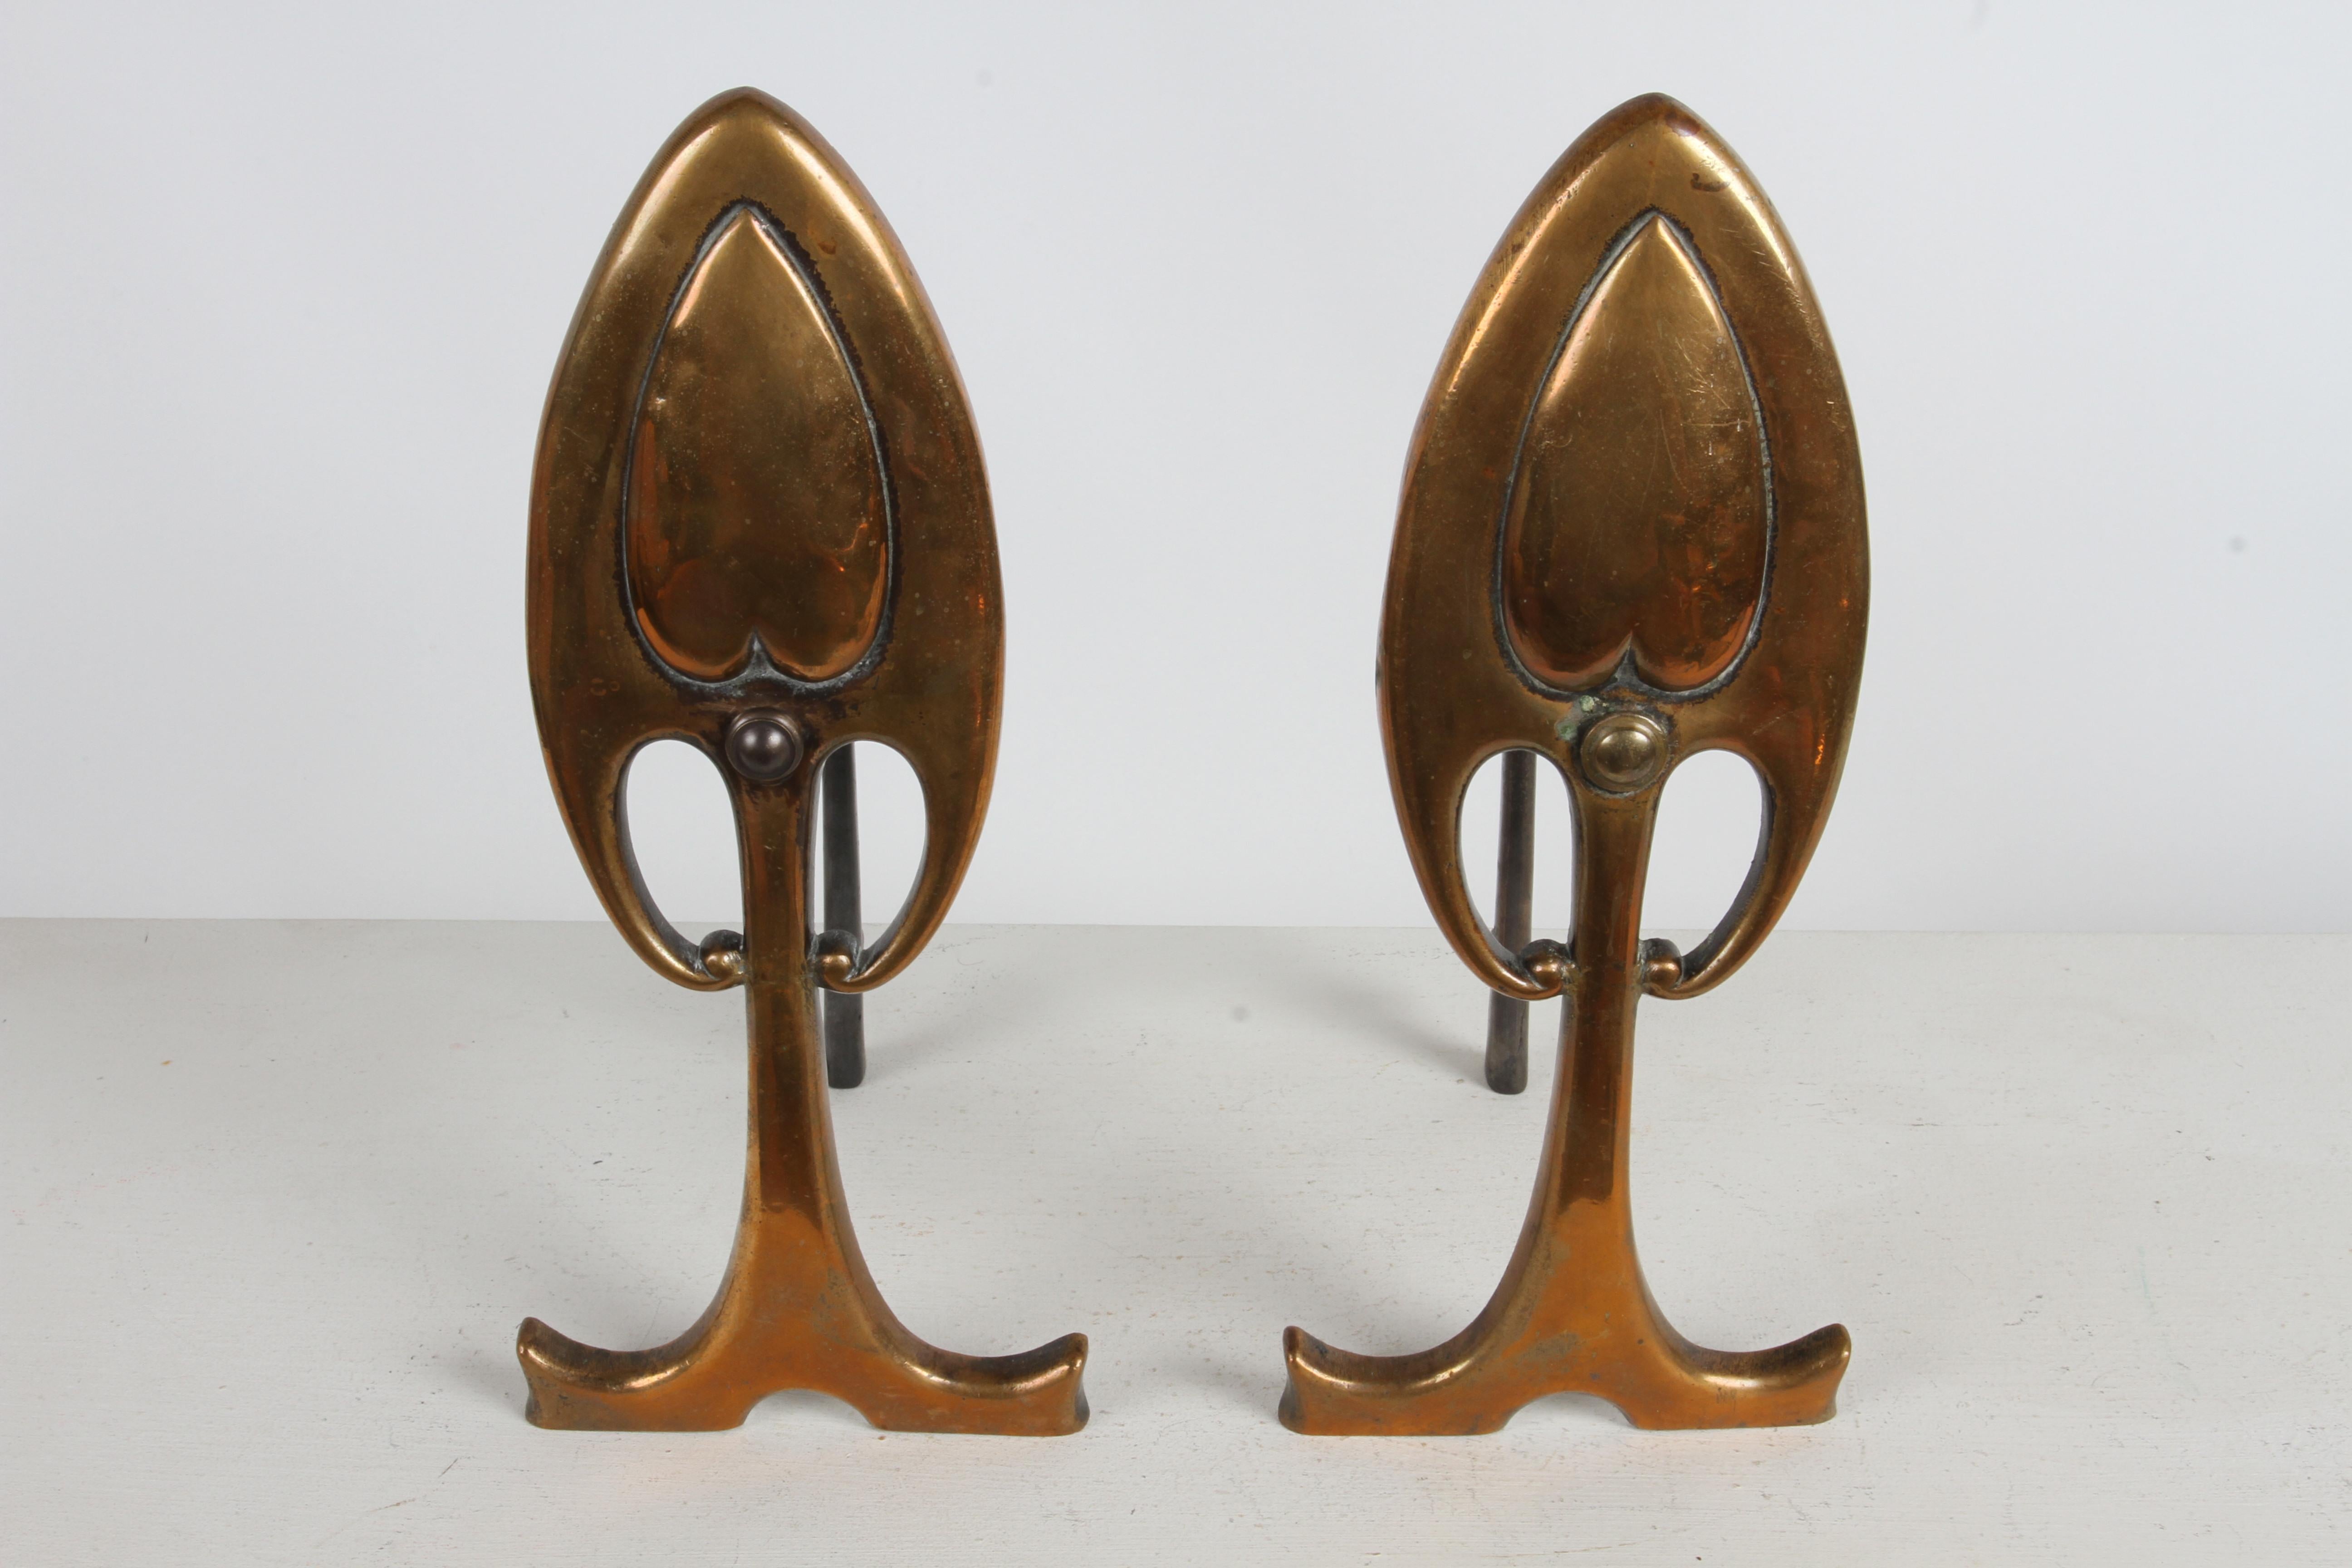 Classic petite pair of Art Nouveau or Aesthetic Movement period bronze andirons or firedogs done in repoussee. I believe these to be bronze, they have a slight copper tone to them with heart motif or Anthurium leaf shape. Most likely purchased by